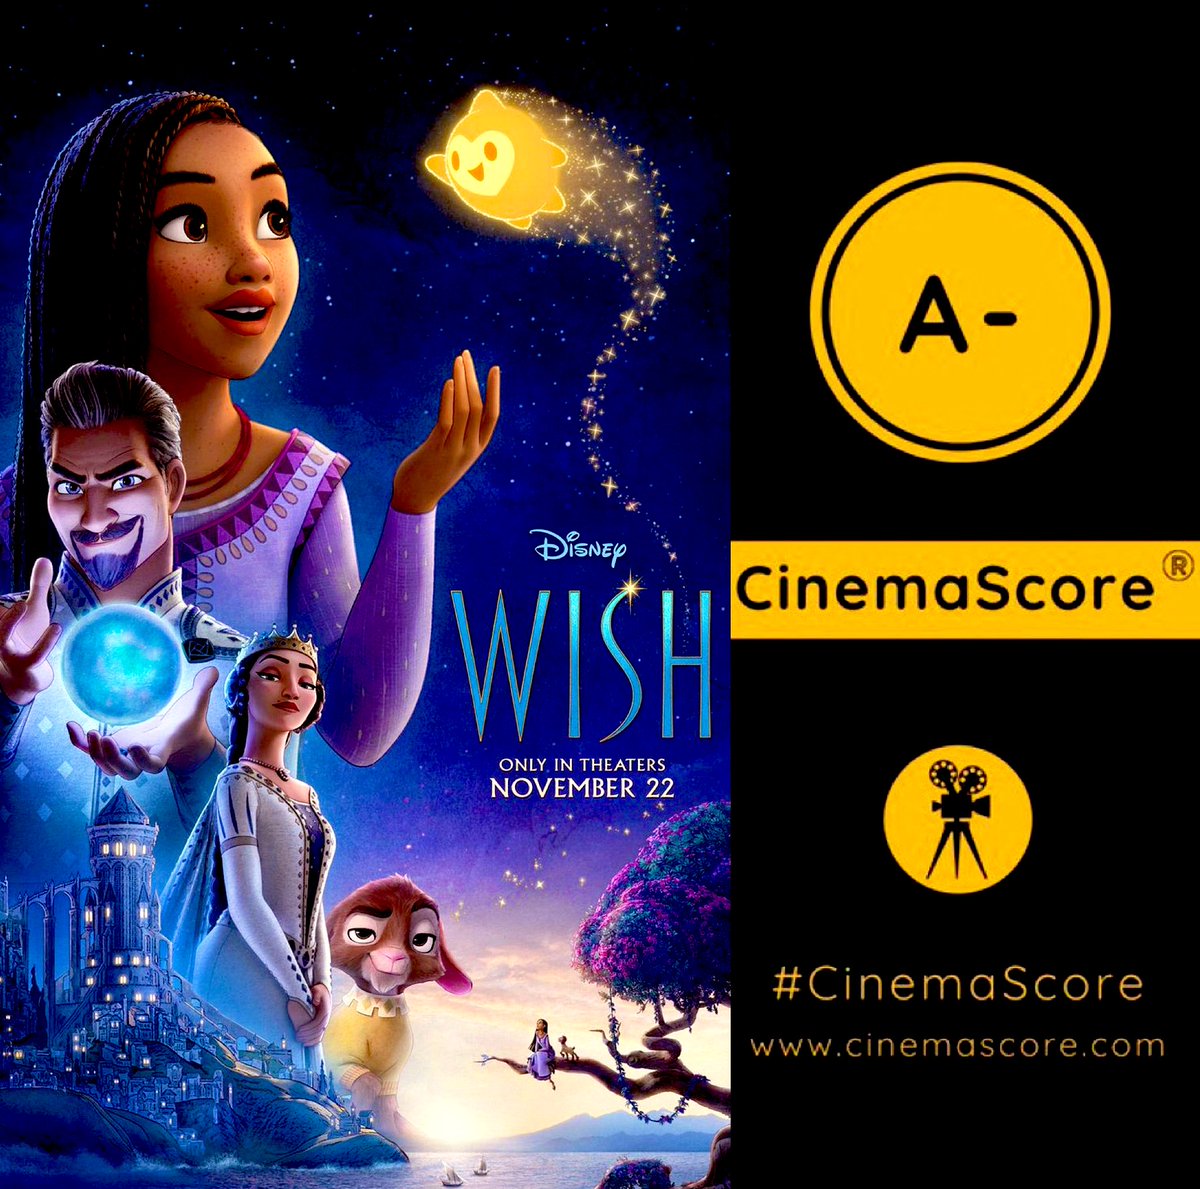 Audiences have spoken!!! #1
#Disney’s new animation #Wish is being more appreciated by moviegoers than by critics, receiving an A- #CinemaScore from audiences, average for PG animations, on par with #Lightyear, #DCLeagueOfSuperPets, #RalphBreaksTheInternet & #Frozen2

Under…